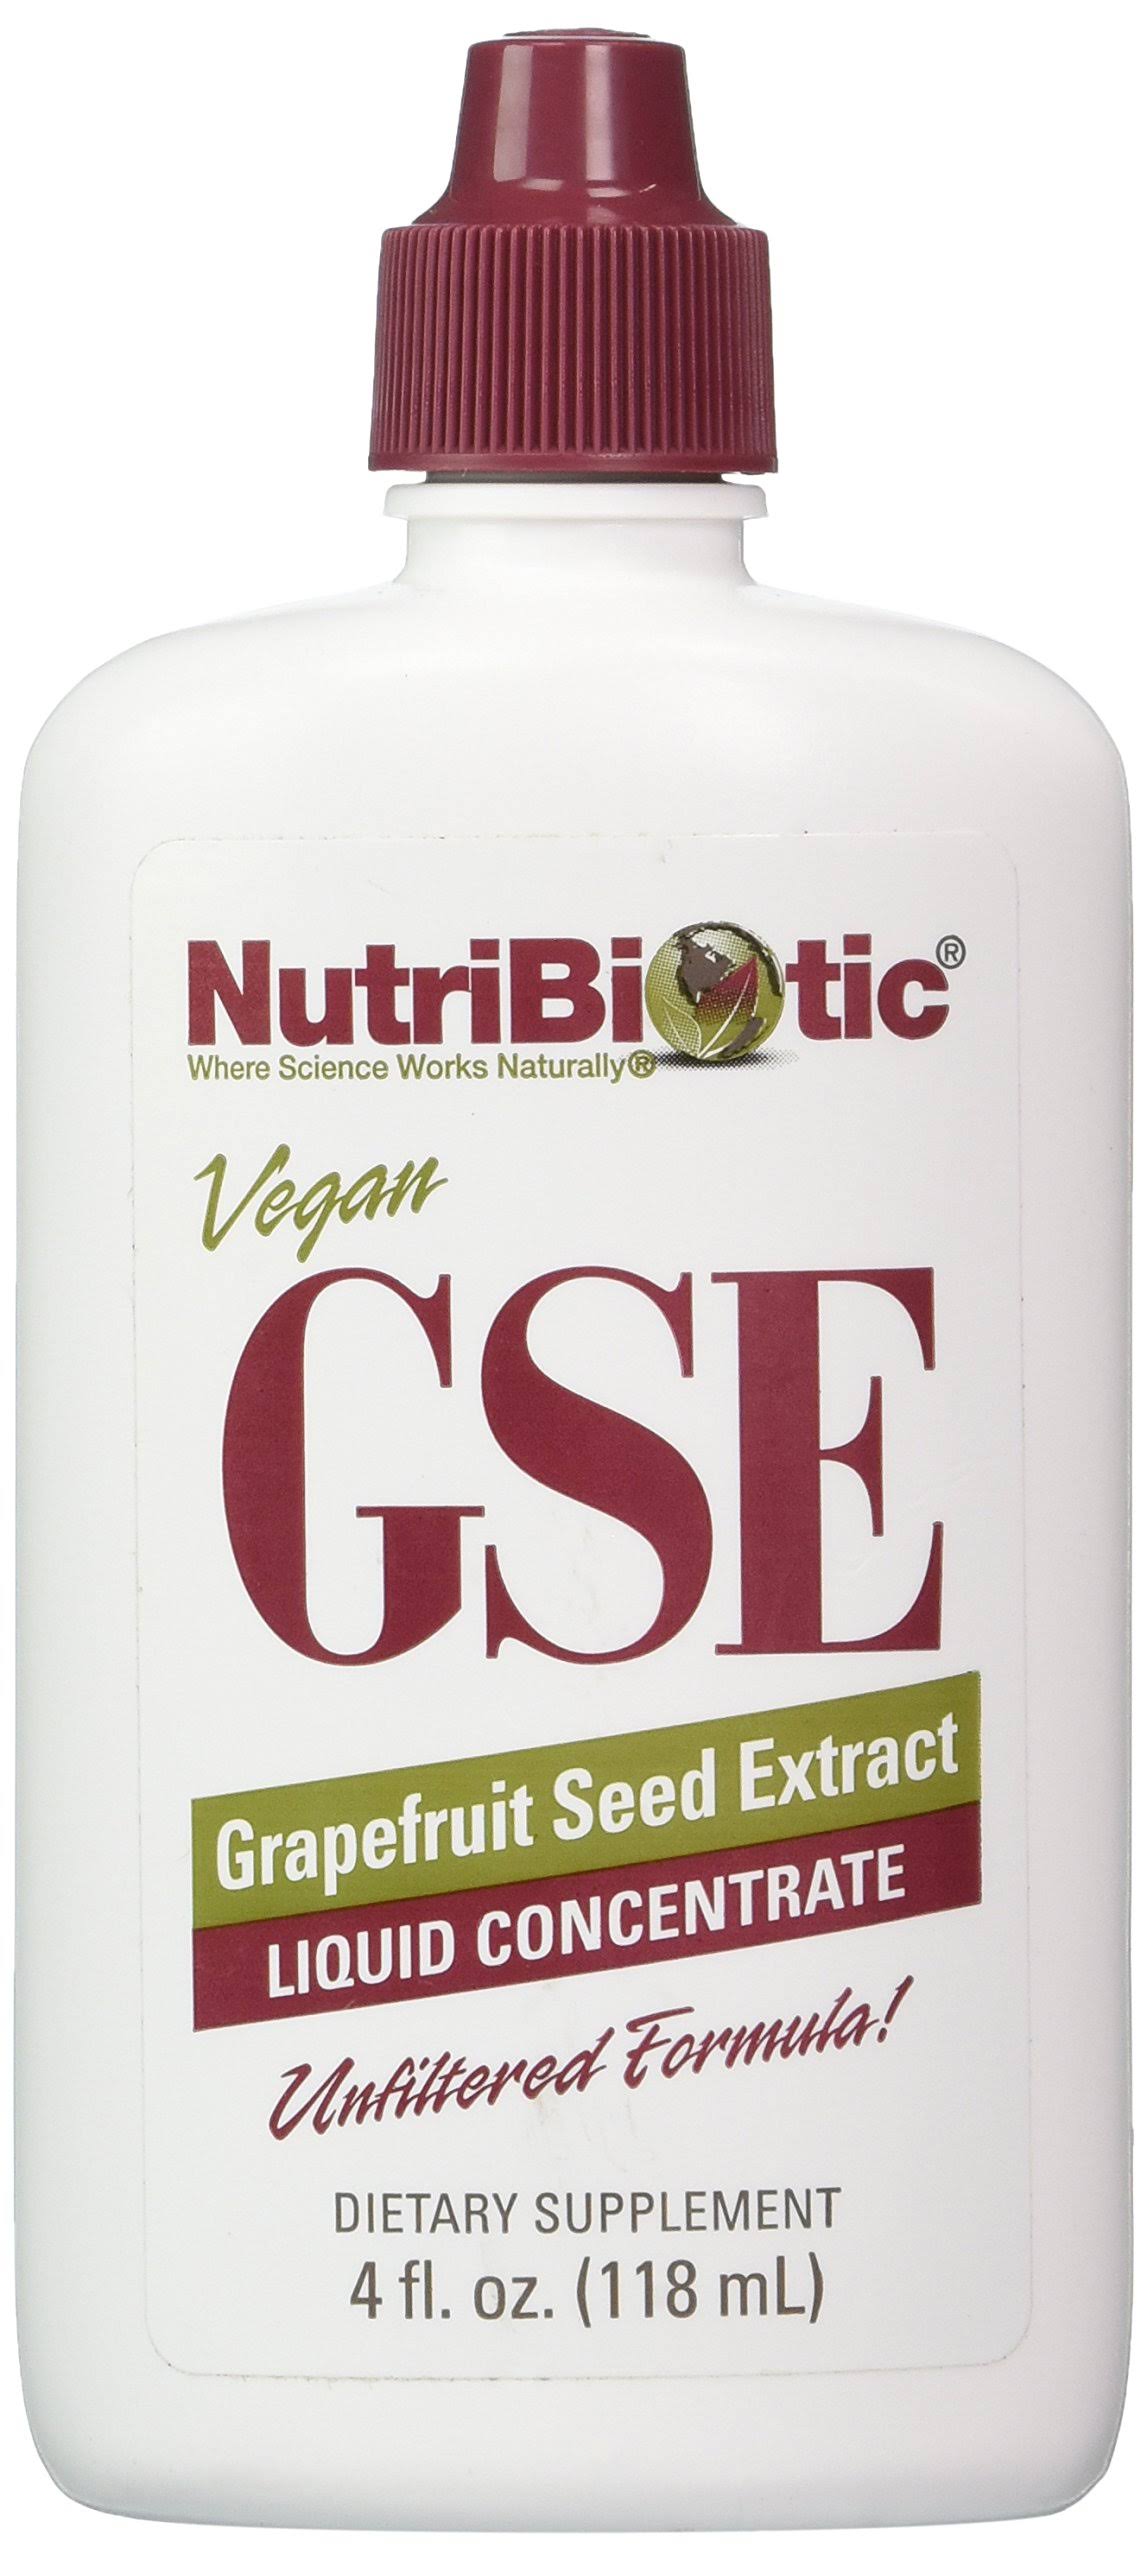 NutriBiotic GSE Liquid Concentrate Grapefruit Seed Extract